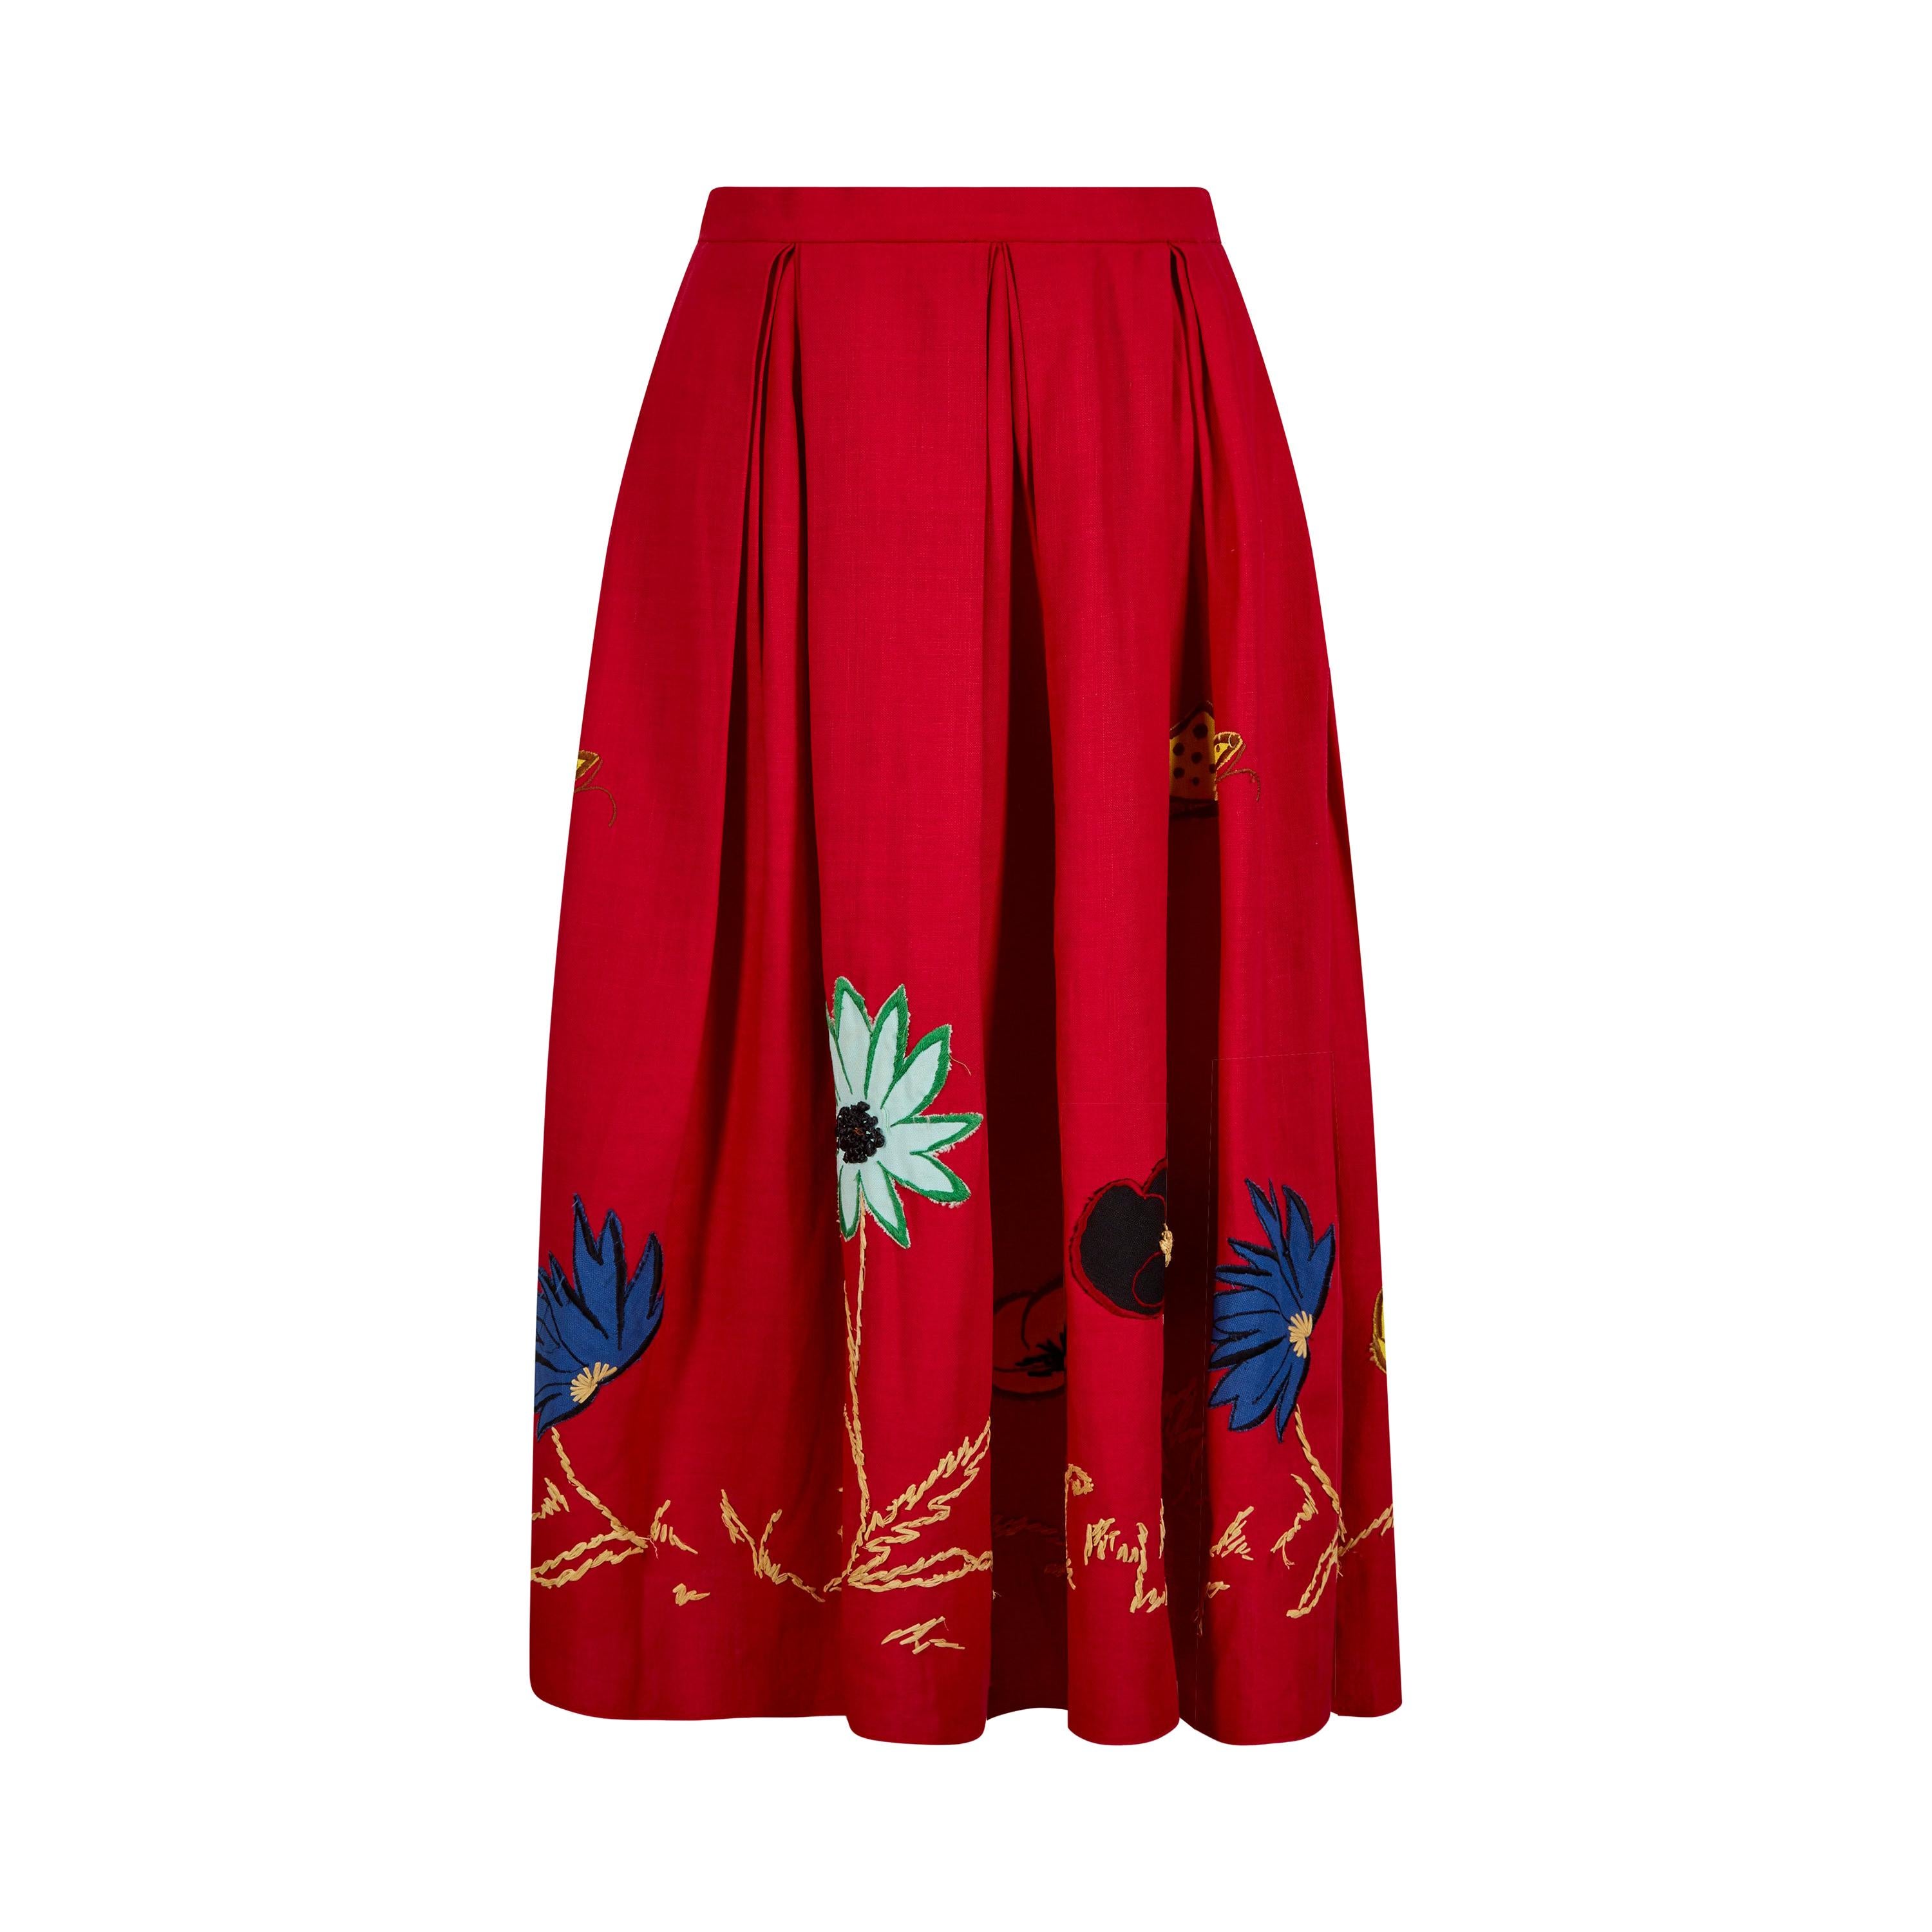 1950s Red Cotton Skirt With Floral Novelty Appliqué